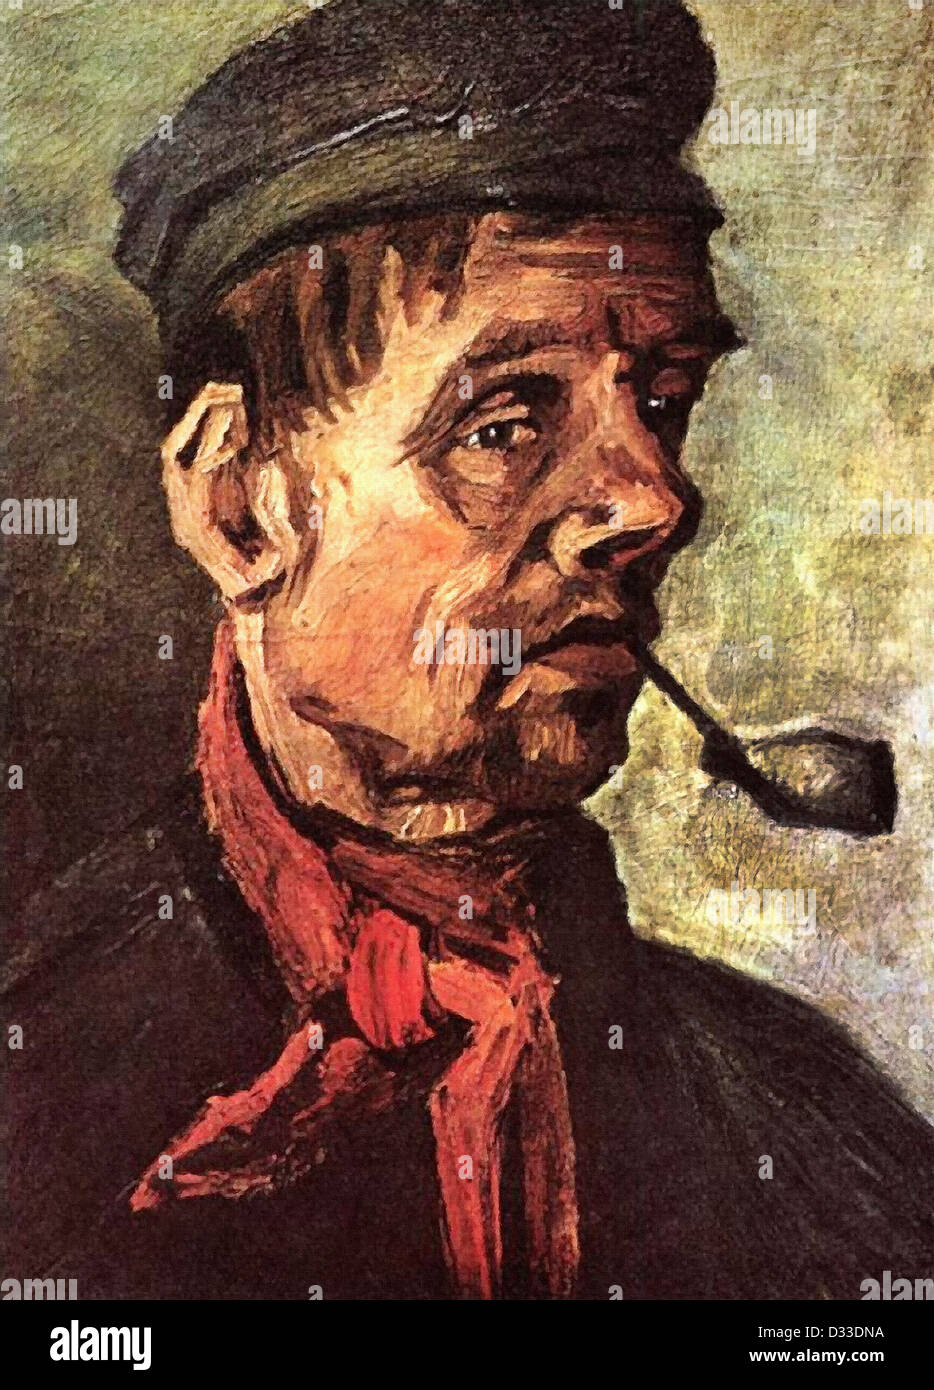 Vincent van Gogh: Head of a Peasant with a Pipe. 1885. Oil on canvas. Rijksmuseum Kröller-Müller, Otterlo, Netherlands. Realism. Stock Photo